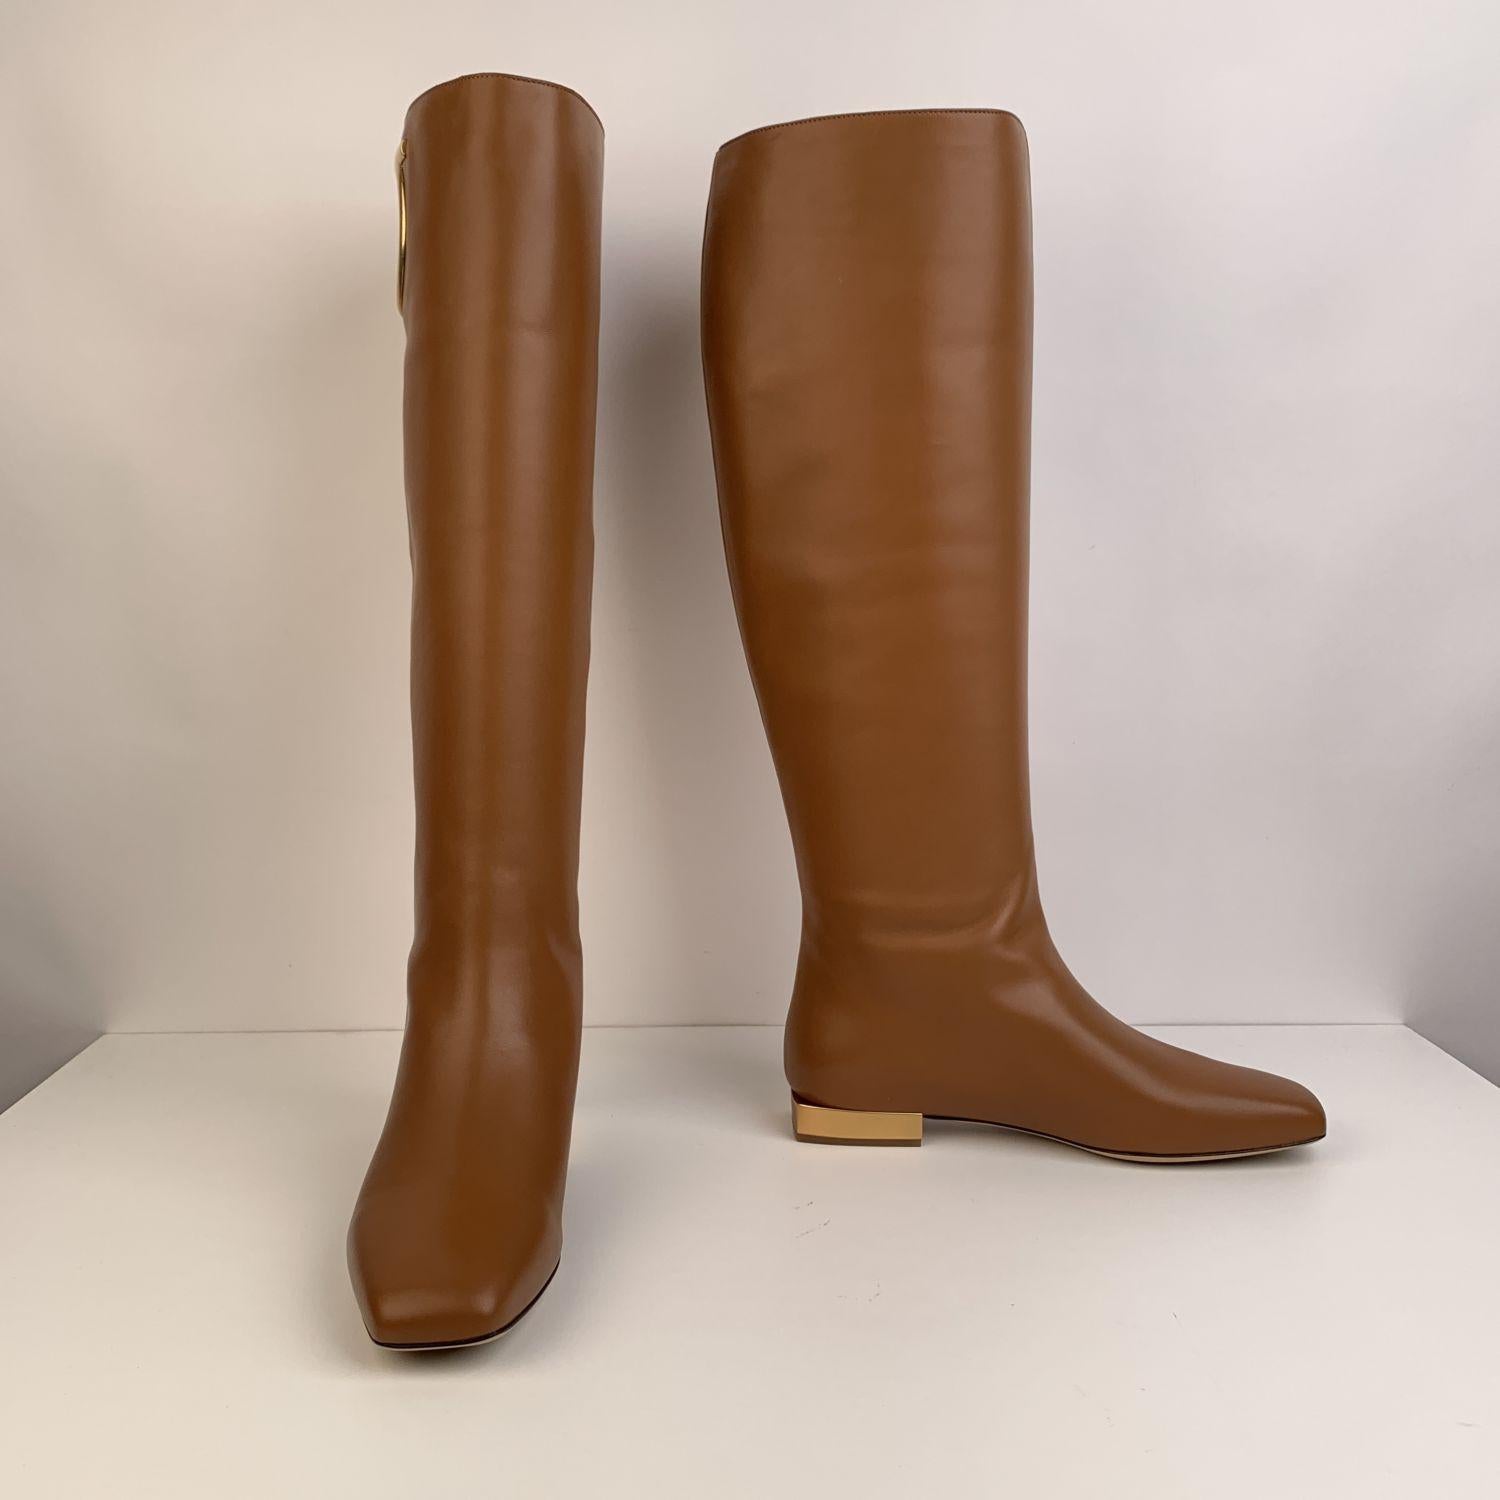 Stunning Salvatore Ferragamo Avio 10 Knee-High Flat Boots. Crafted in tan calf leather, they feature square toe, pull-on style and cut-out Gancino detail on the top. Detailed with gold-tone heels. Leather sole. Heels Height: 1 inch - 2,6 cm. Made in